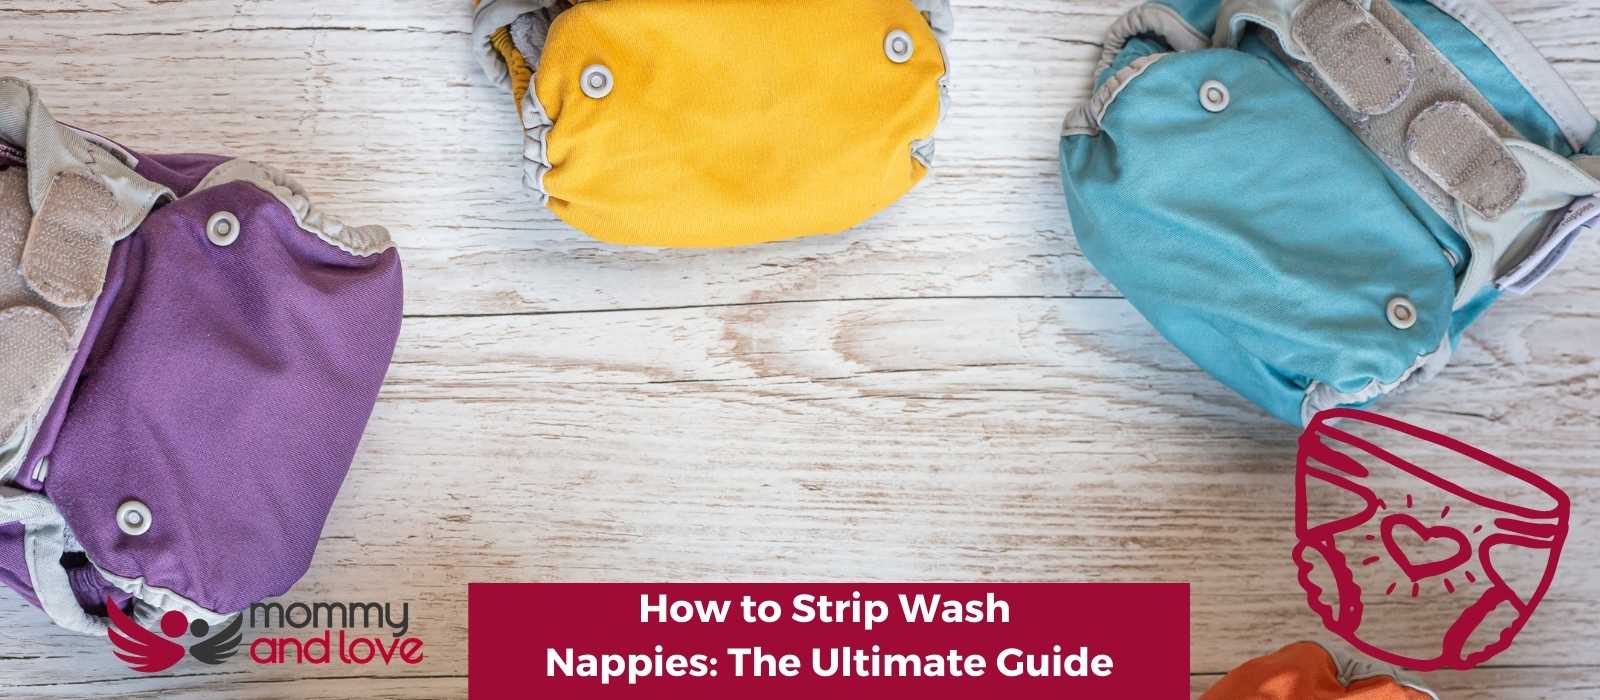 How to Strip Wash Nappies The Ultimate Guide